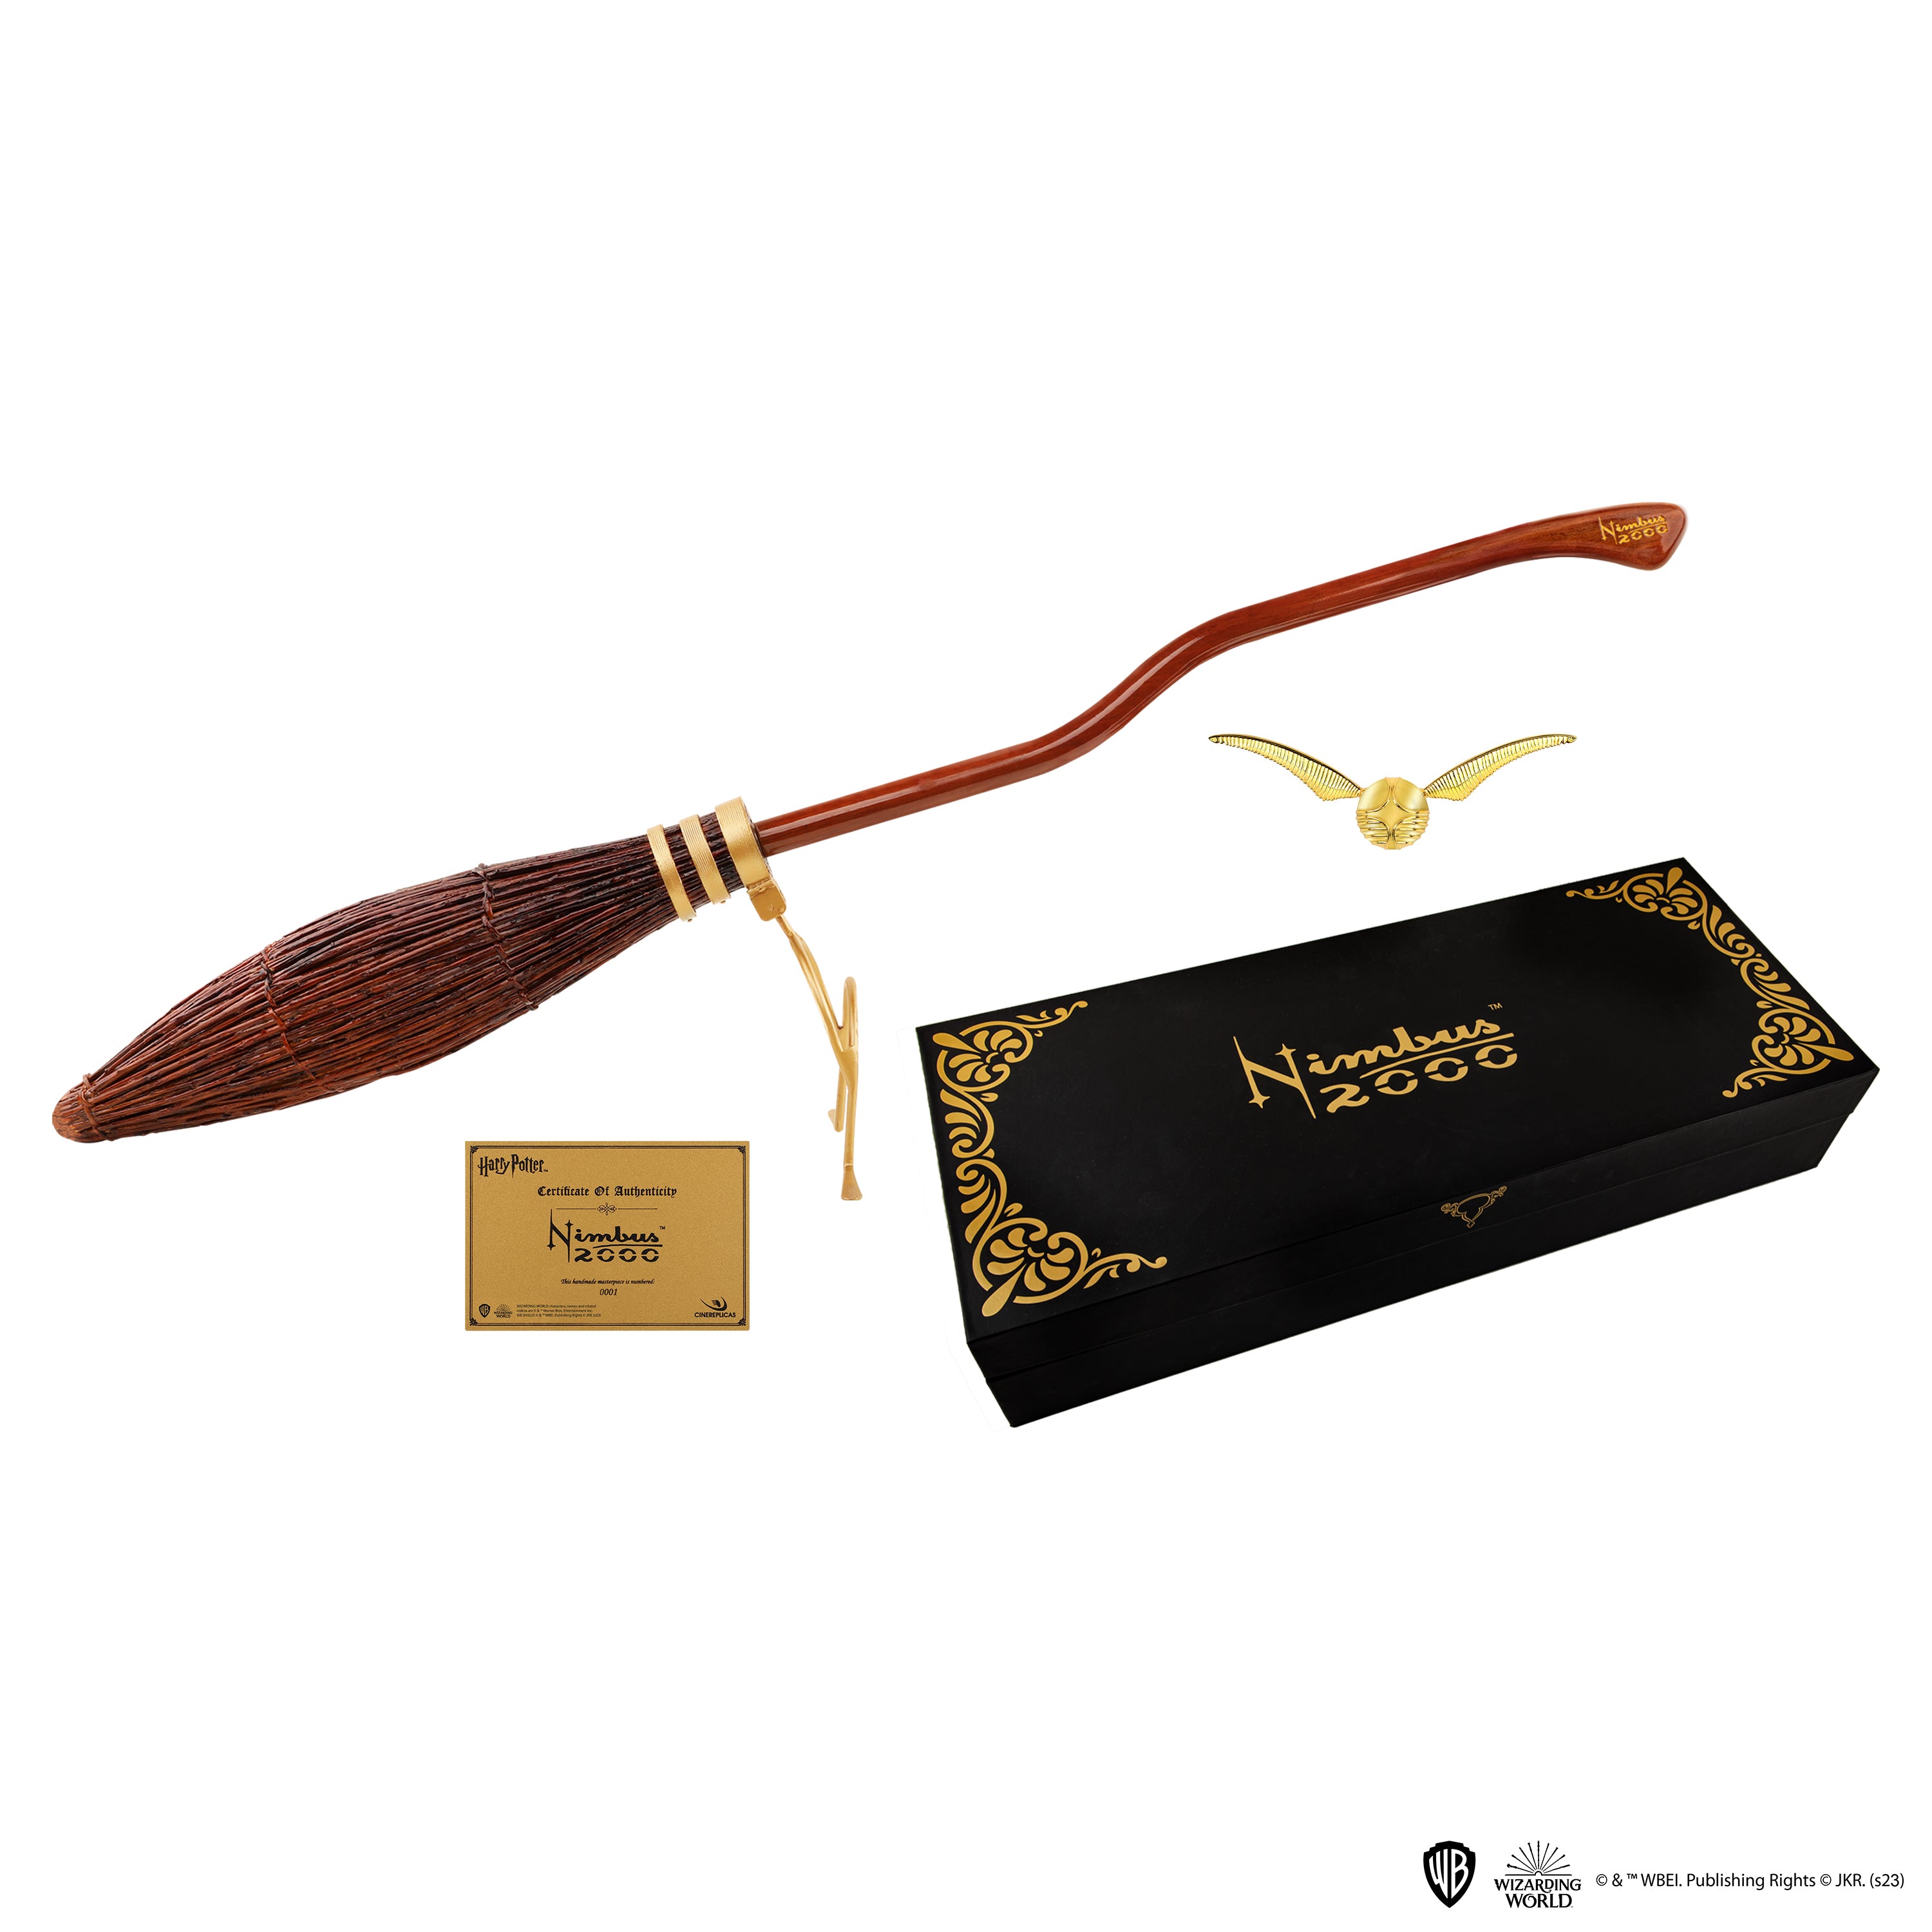 Not for sale! Harry Potter Nimbus 2000 Broom Figure From Japan